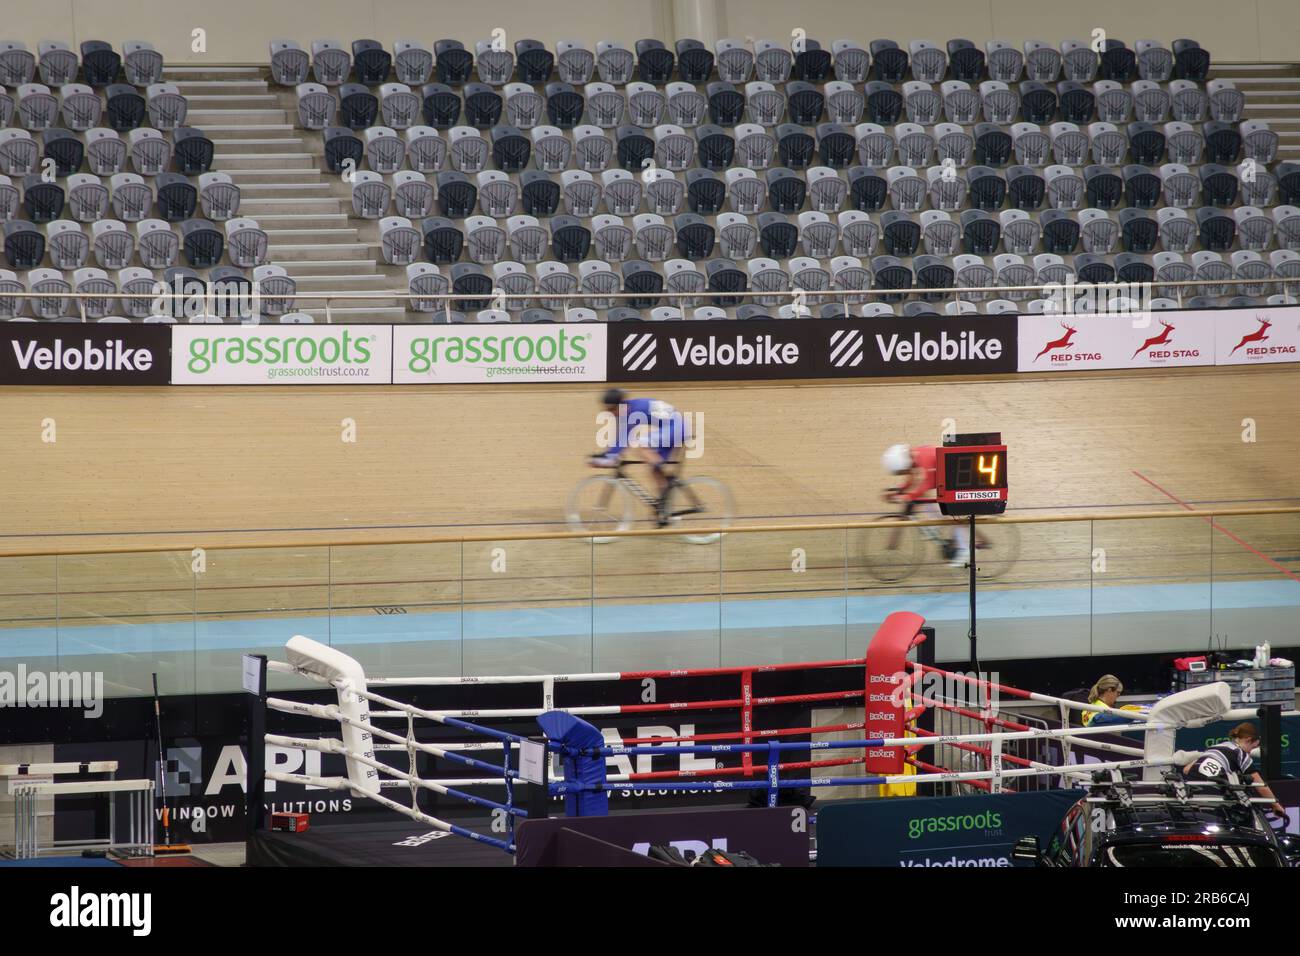 Cambridge New Zealand - July 4 2023; Cycling event with riders blurred in motion inside velodrome. Stock Photo